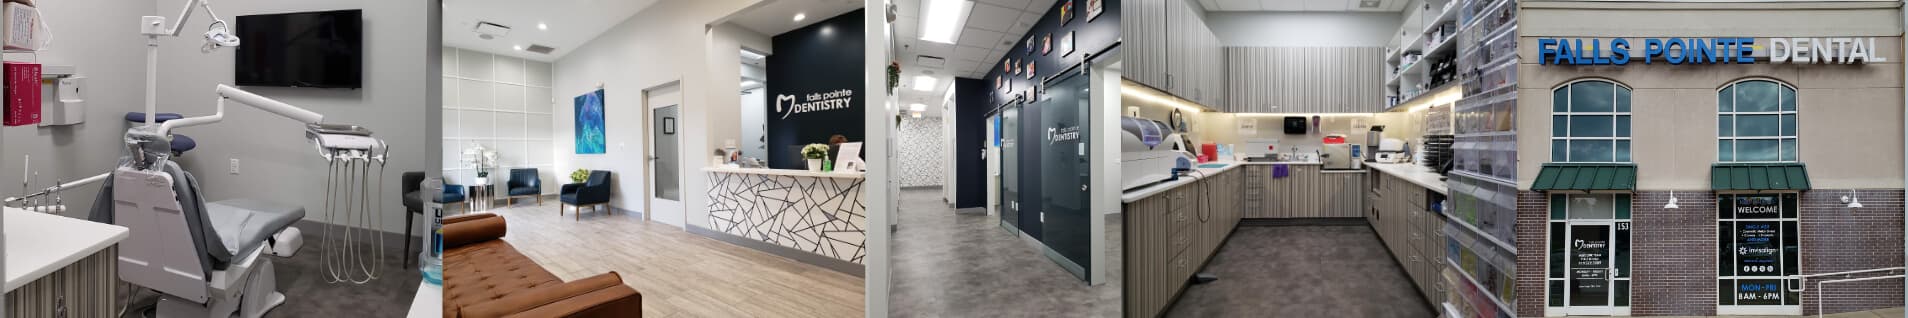 Falls Pointe Dentistry Office Collage Photo